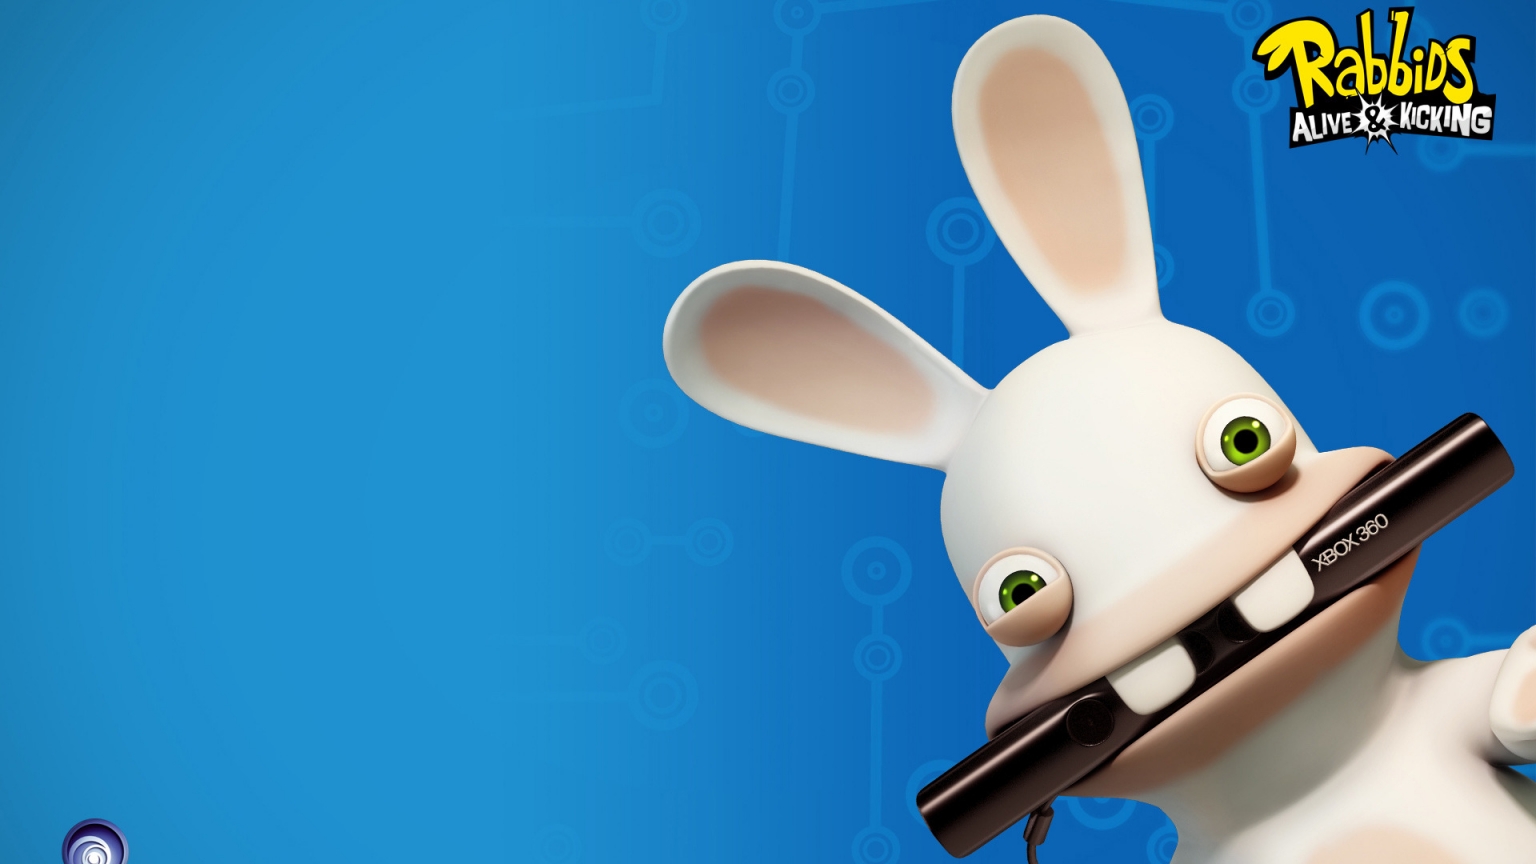 Rabbids Alive and Kicking for 1536 x 864 HDTV resolution